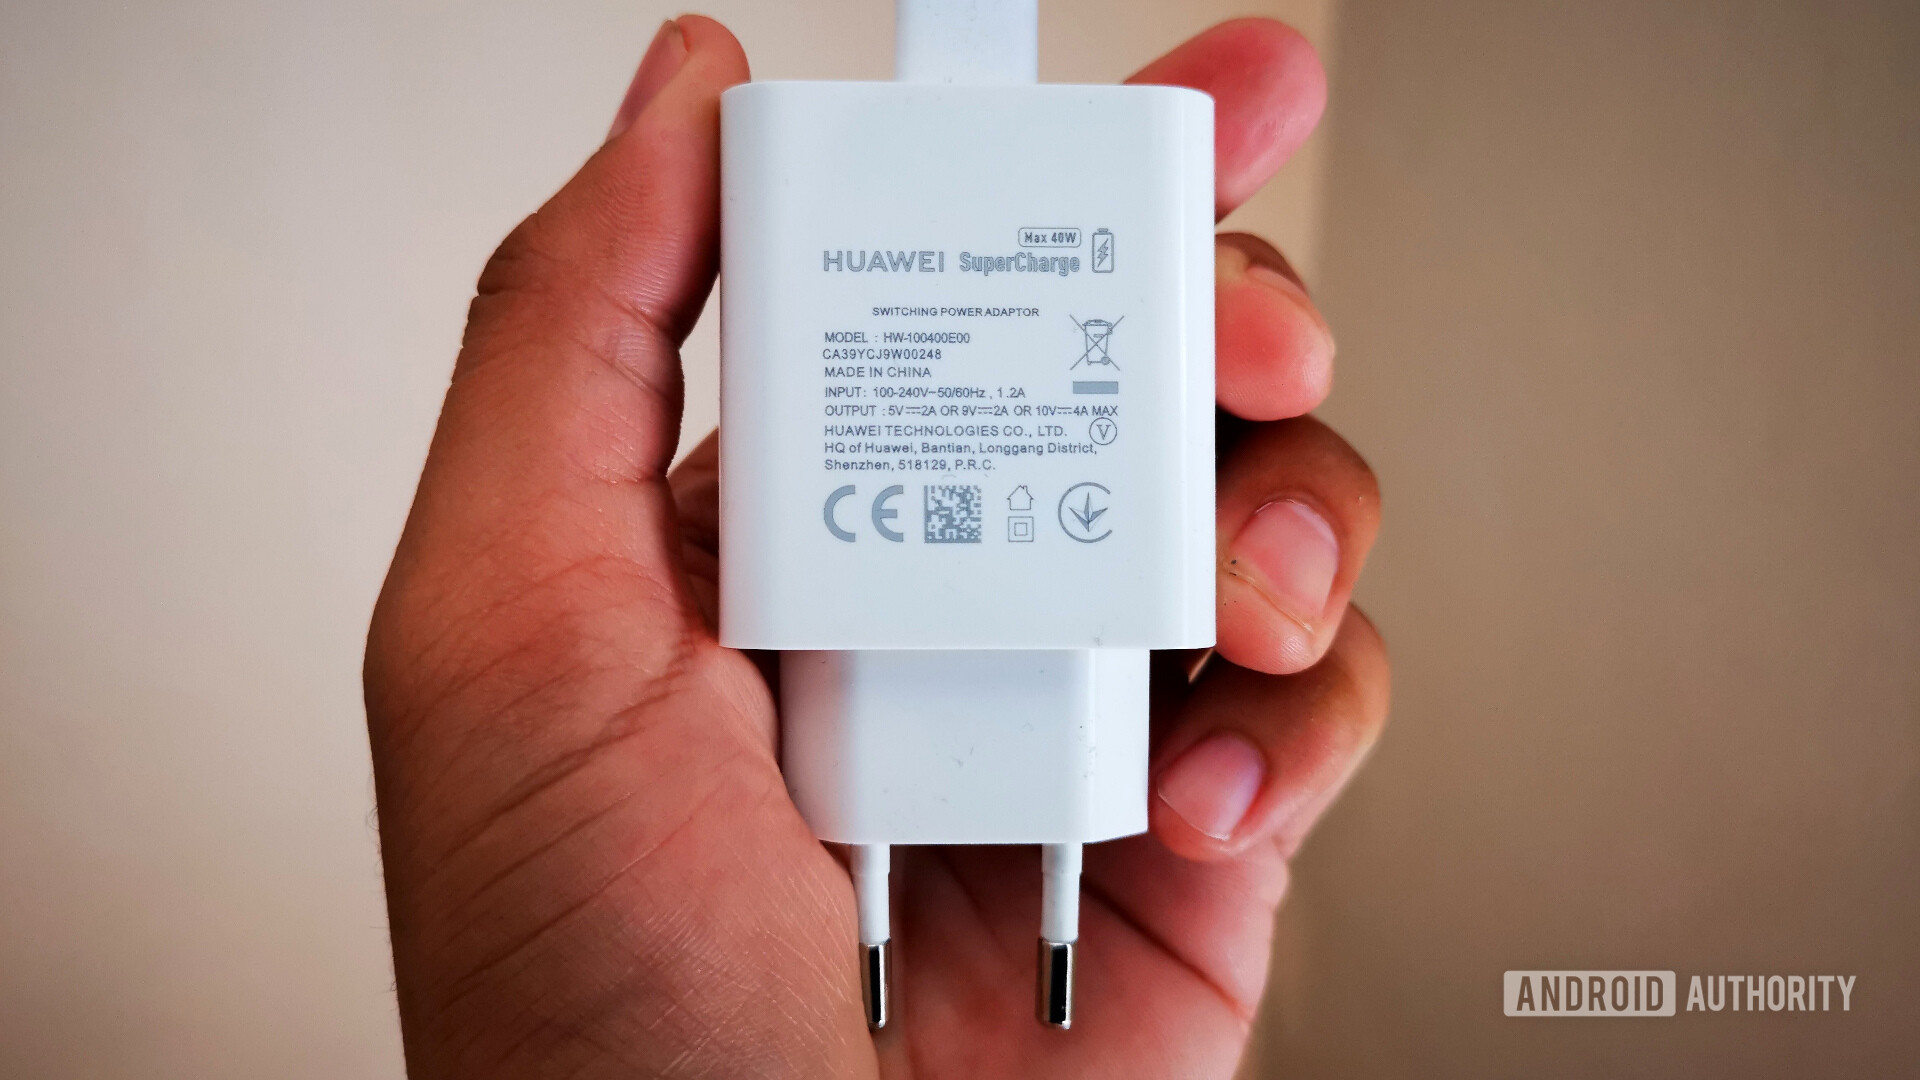 The HUAWEI Mate 20 Pro charger.